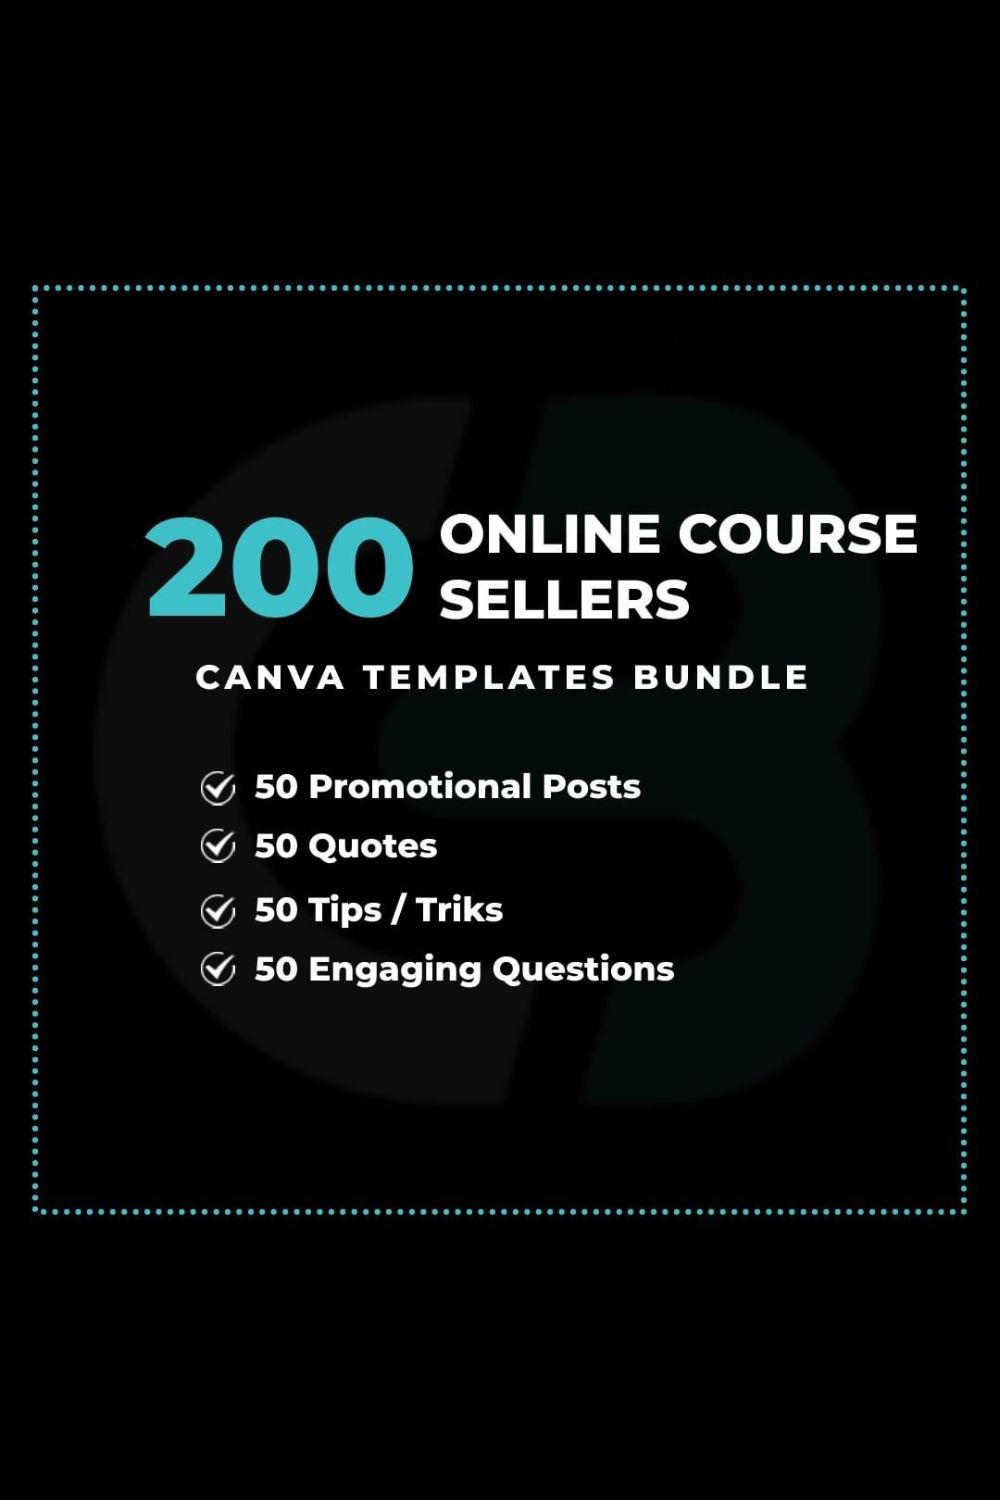 Online Course Sellers Canva Templates Pinterest image.